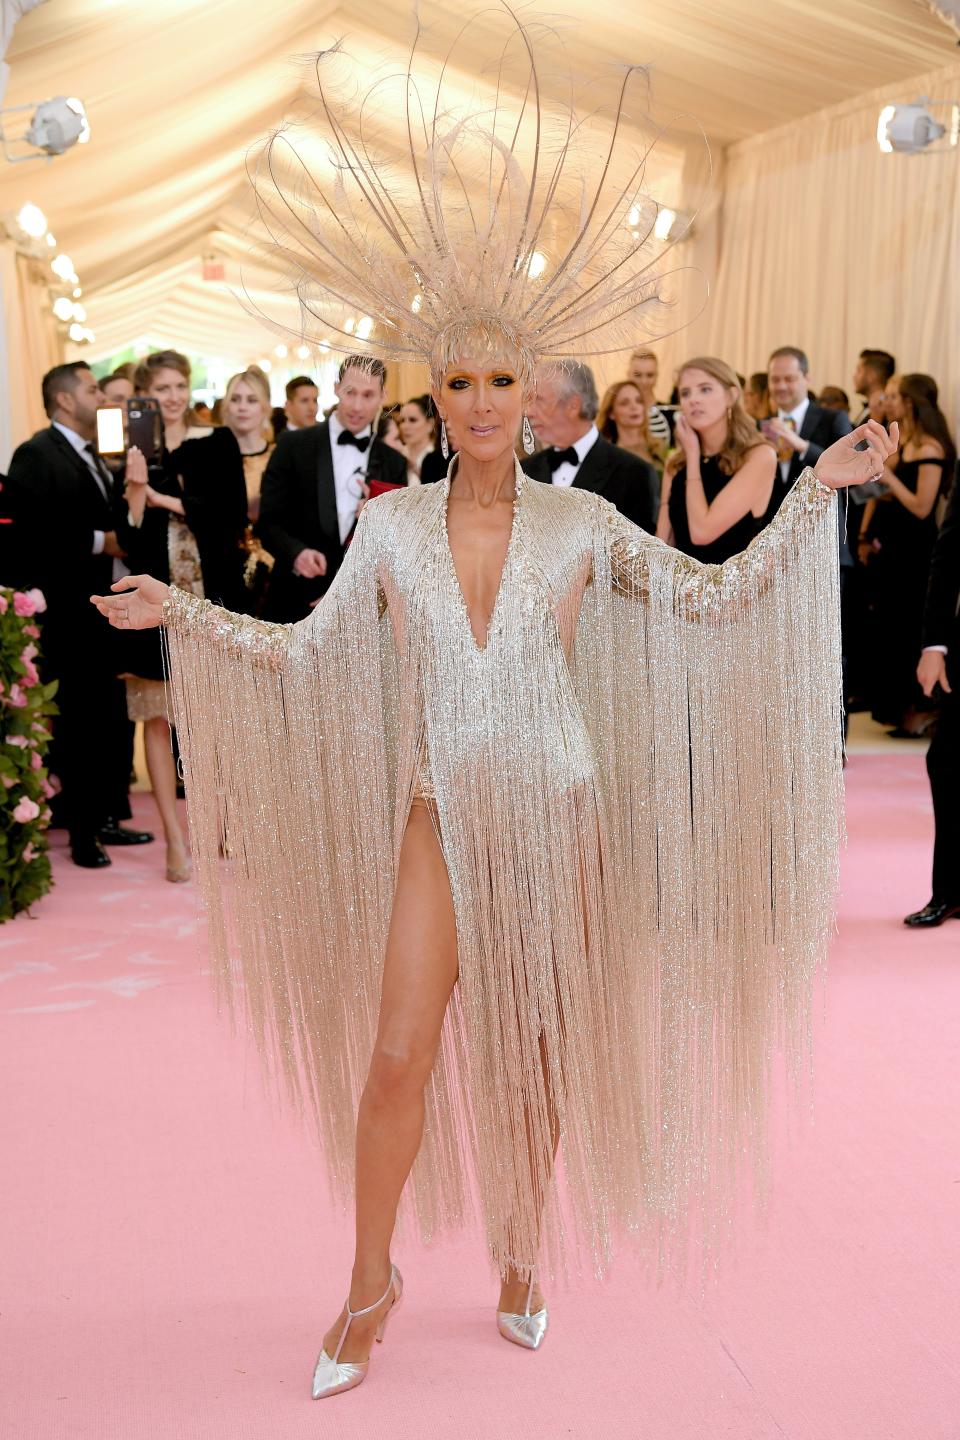 <h1 class="title">Céline Dion in Oscar de la Renta and custom Chloe Gosselin shoes wearing Fred Leighton jewelry and a Noel Stewart headpiece</h1><cite class="credit">Photo: Getty Images</cite>